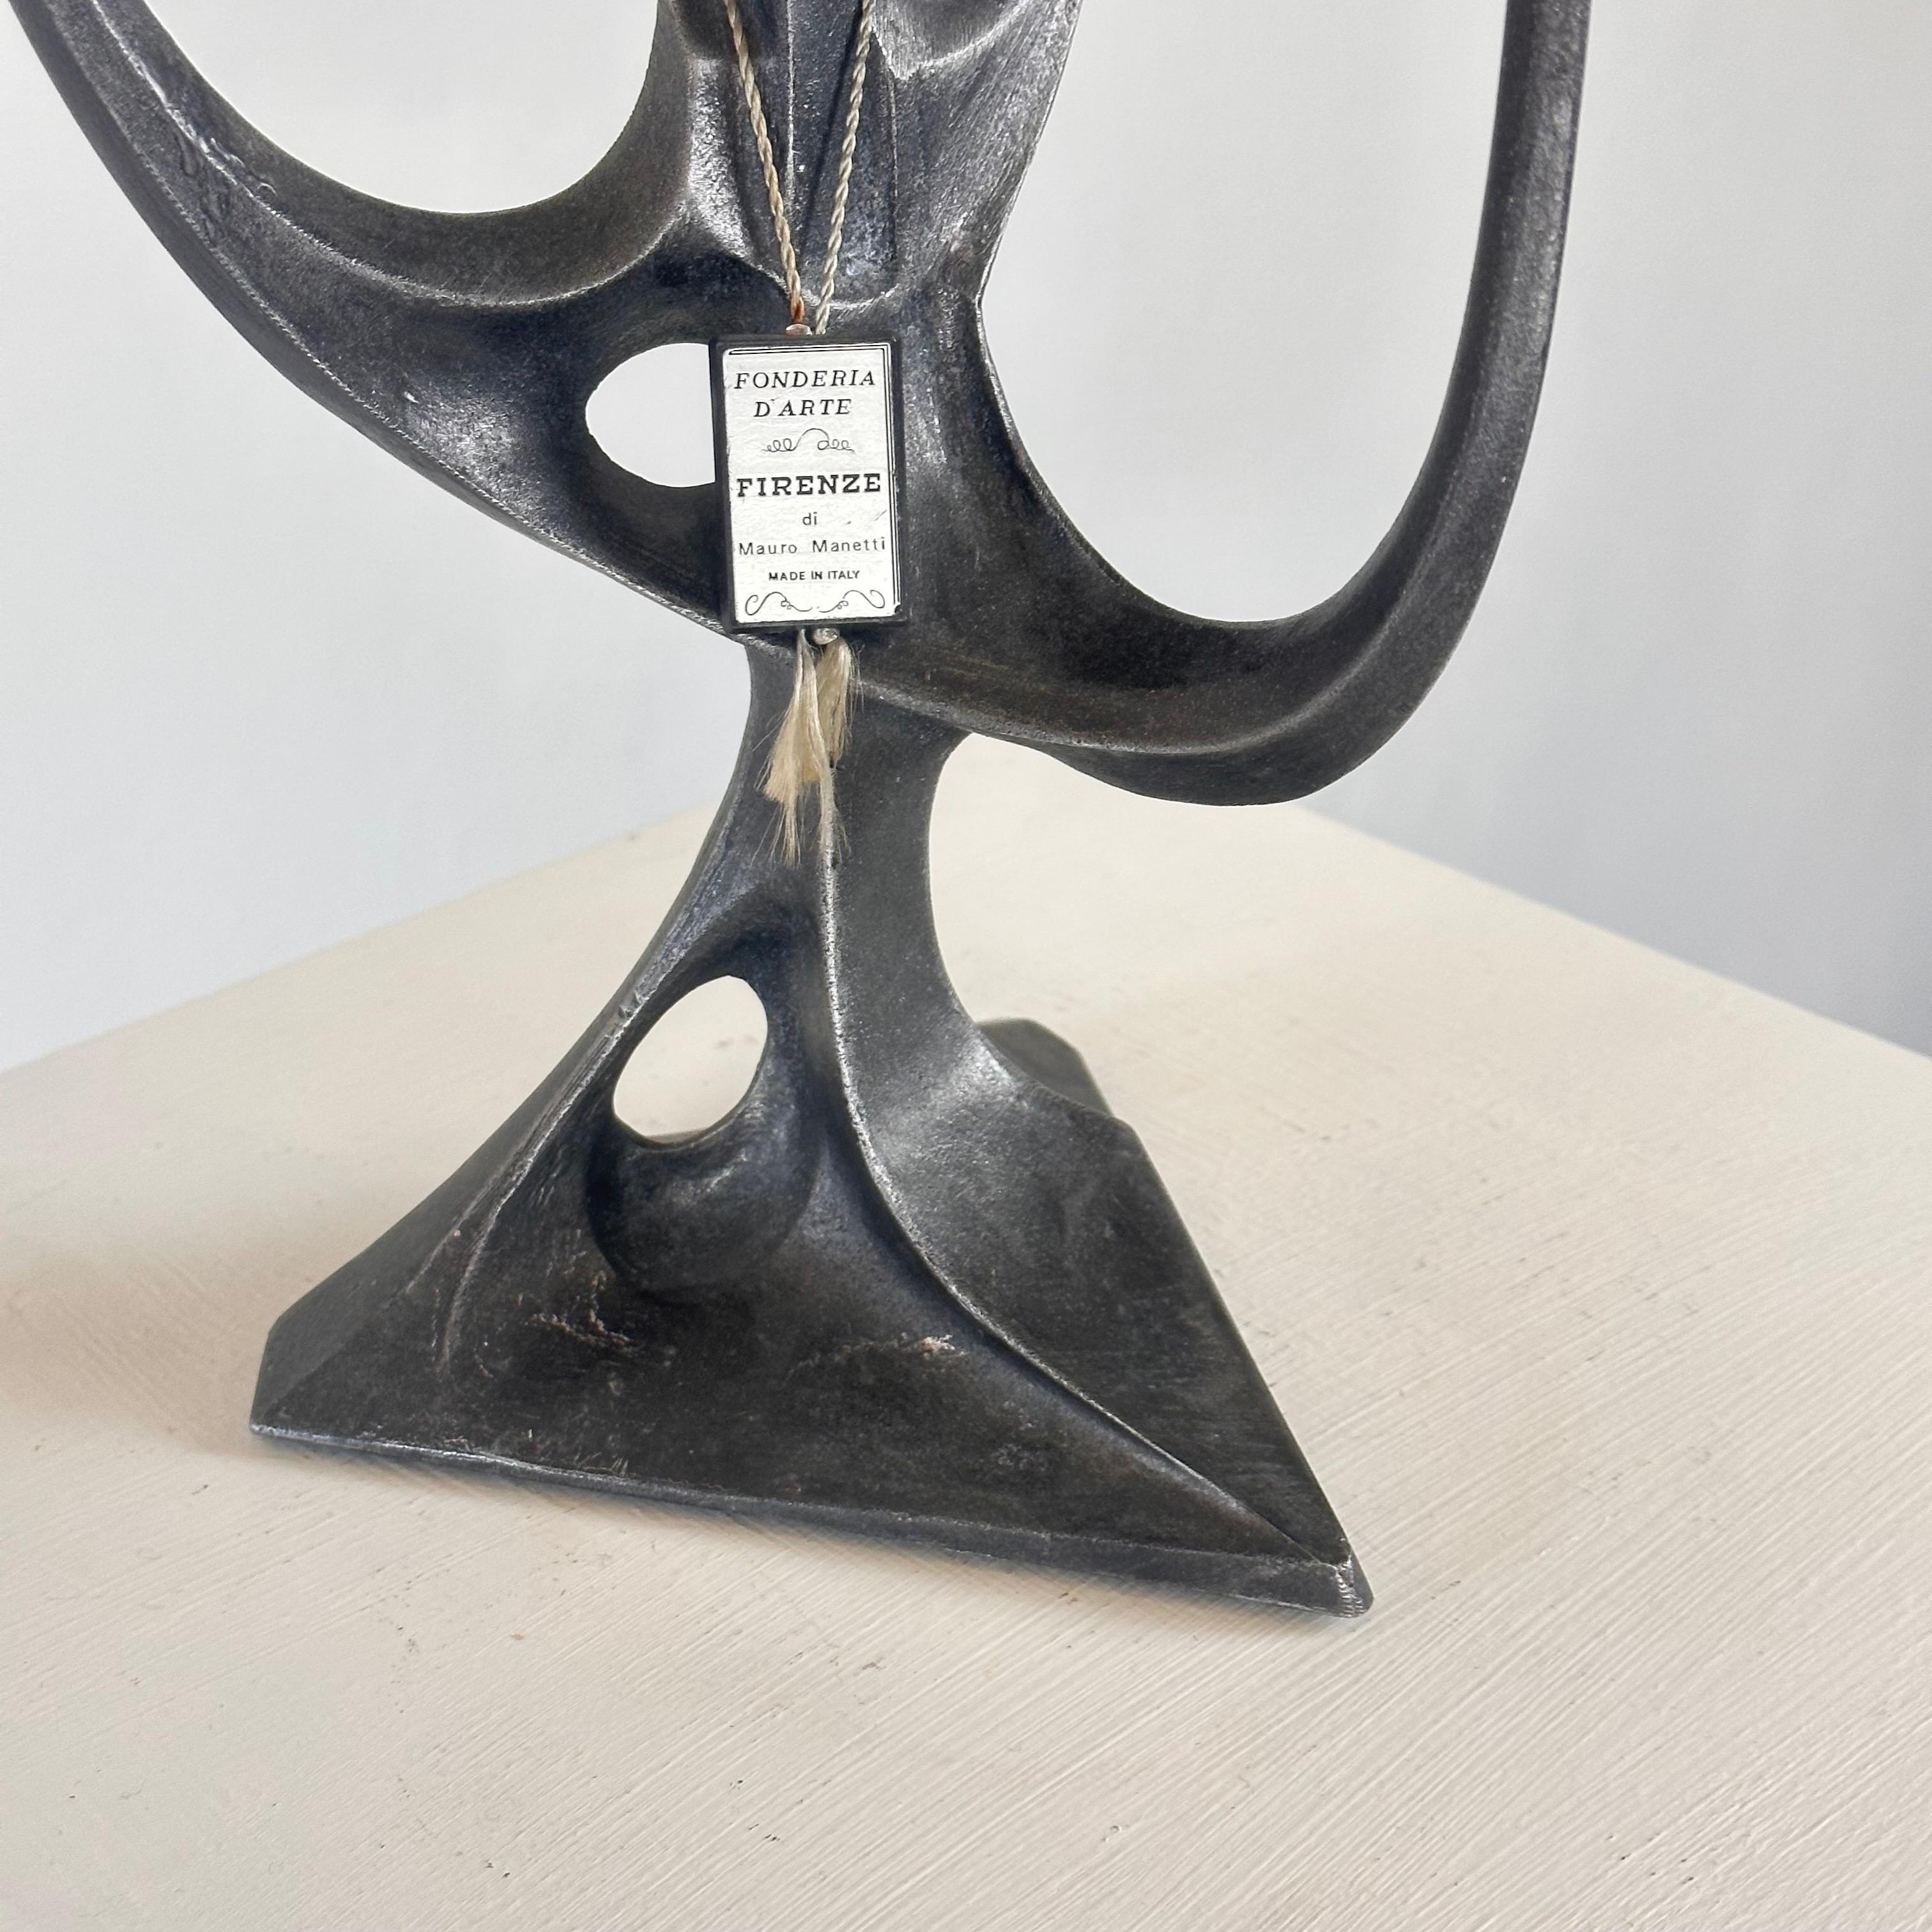 Sculptural Candelabra by Mauro Manetti for Fonderia d'Arte Firenze, 1960s For Sale 3